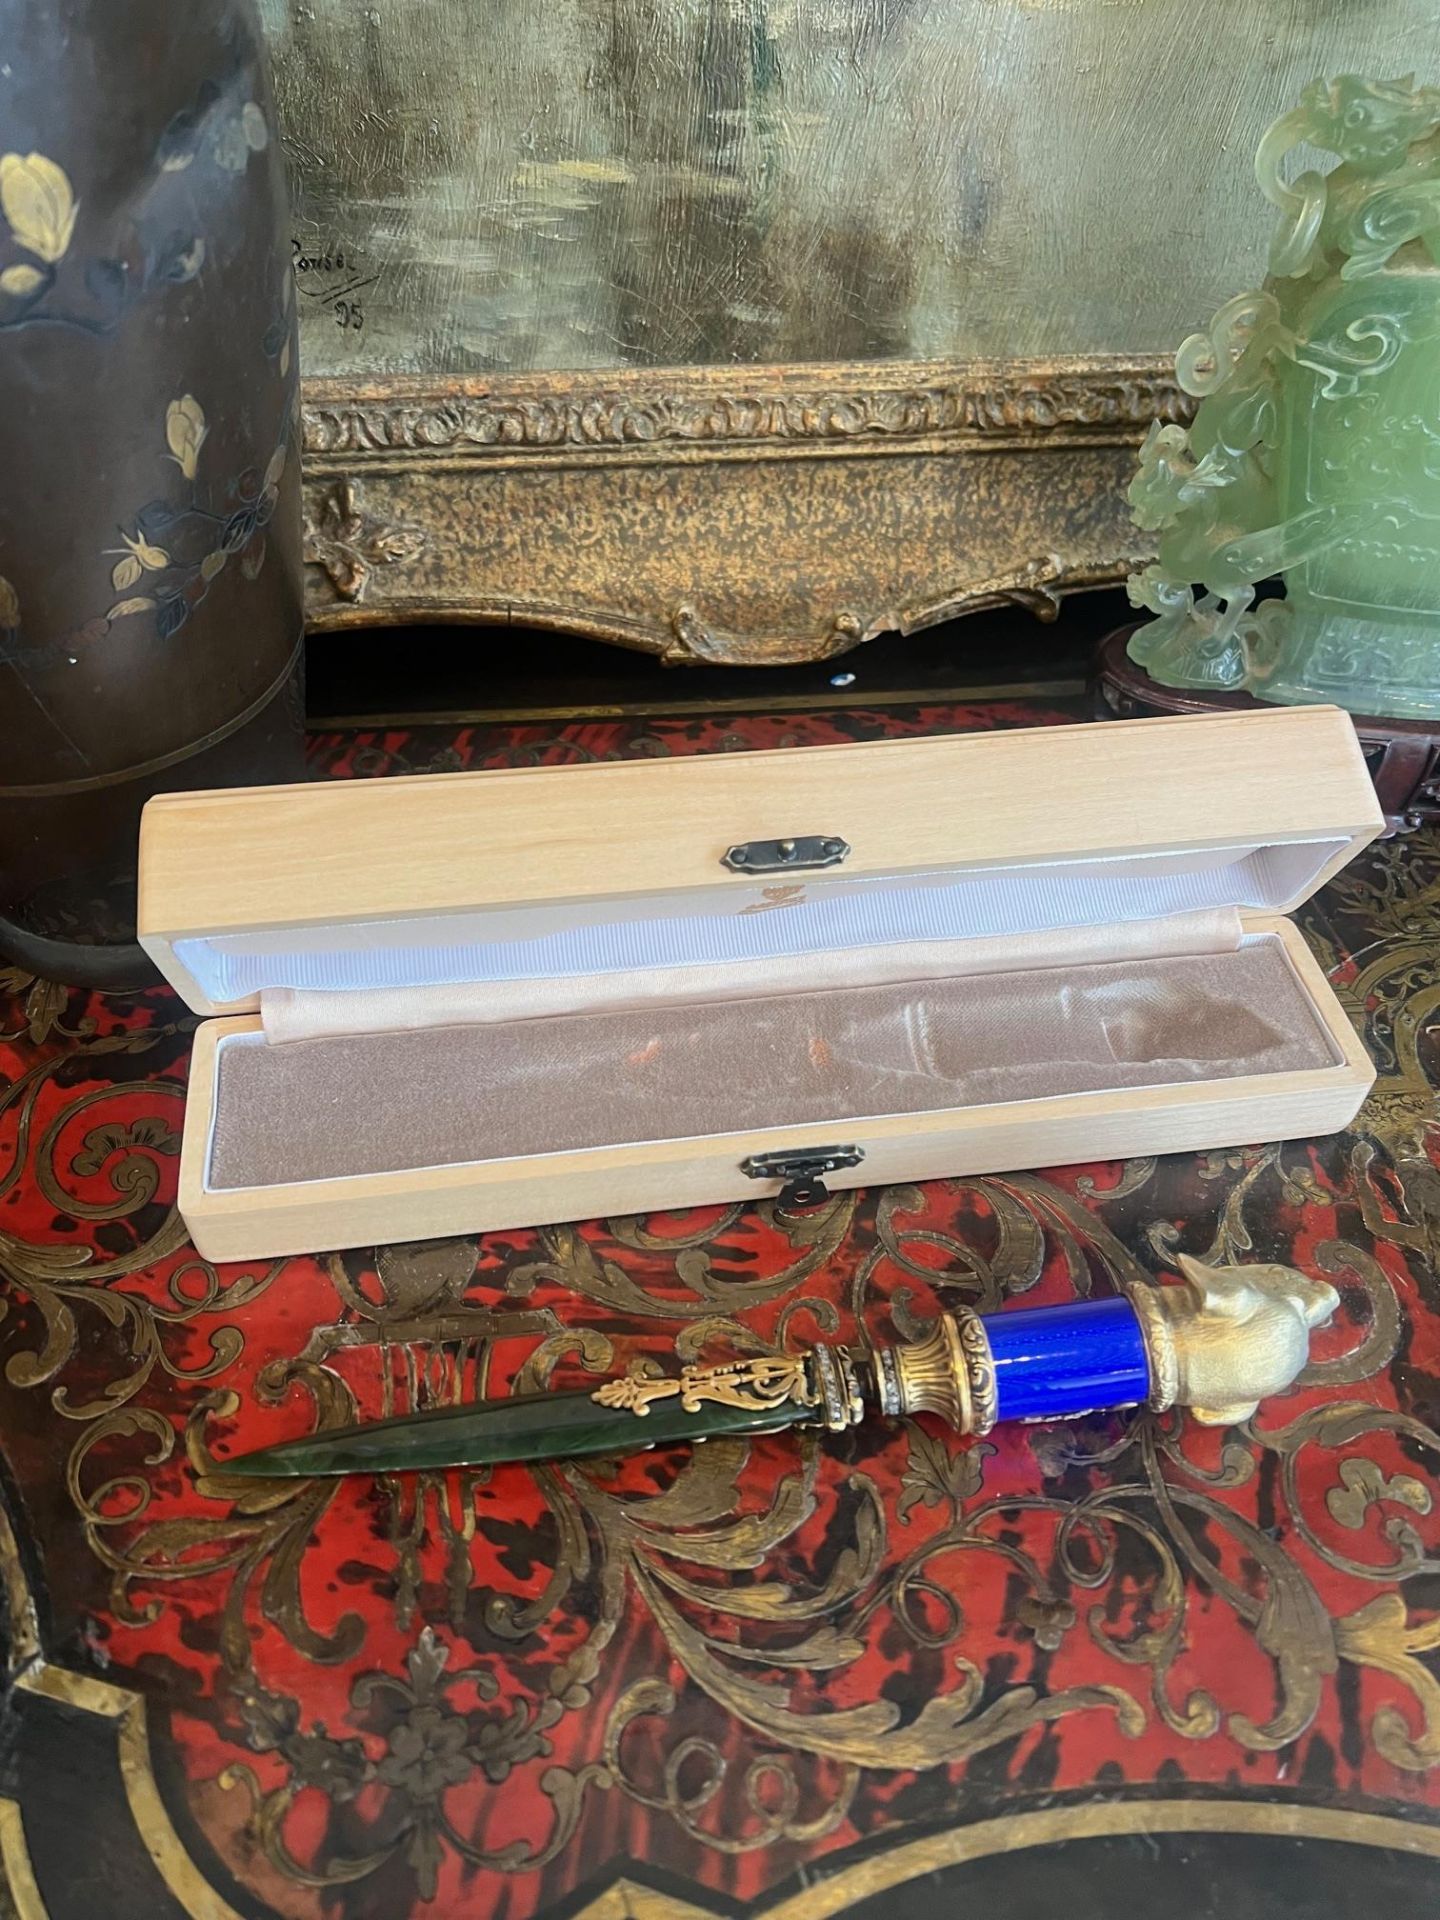 A FABERGE STYLE SILVER GILT, DIAMOND SET, NEPHRITE AND ENAMELLED LETTER KNIFE - Image 6 of 6